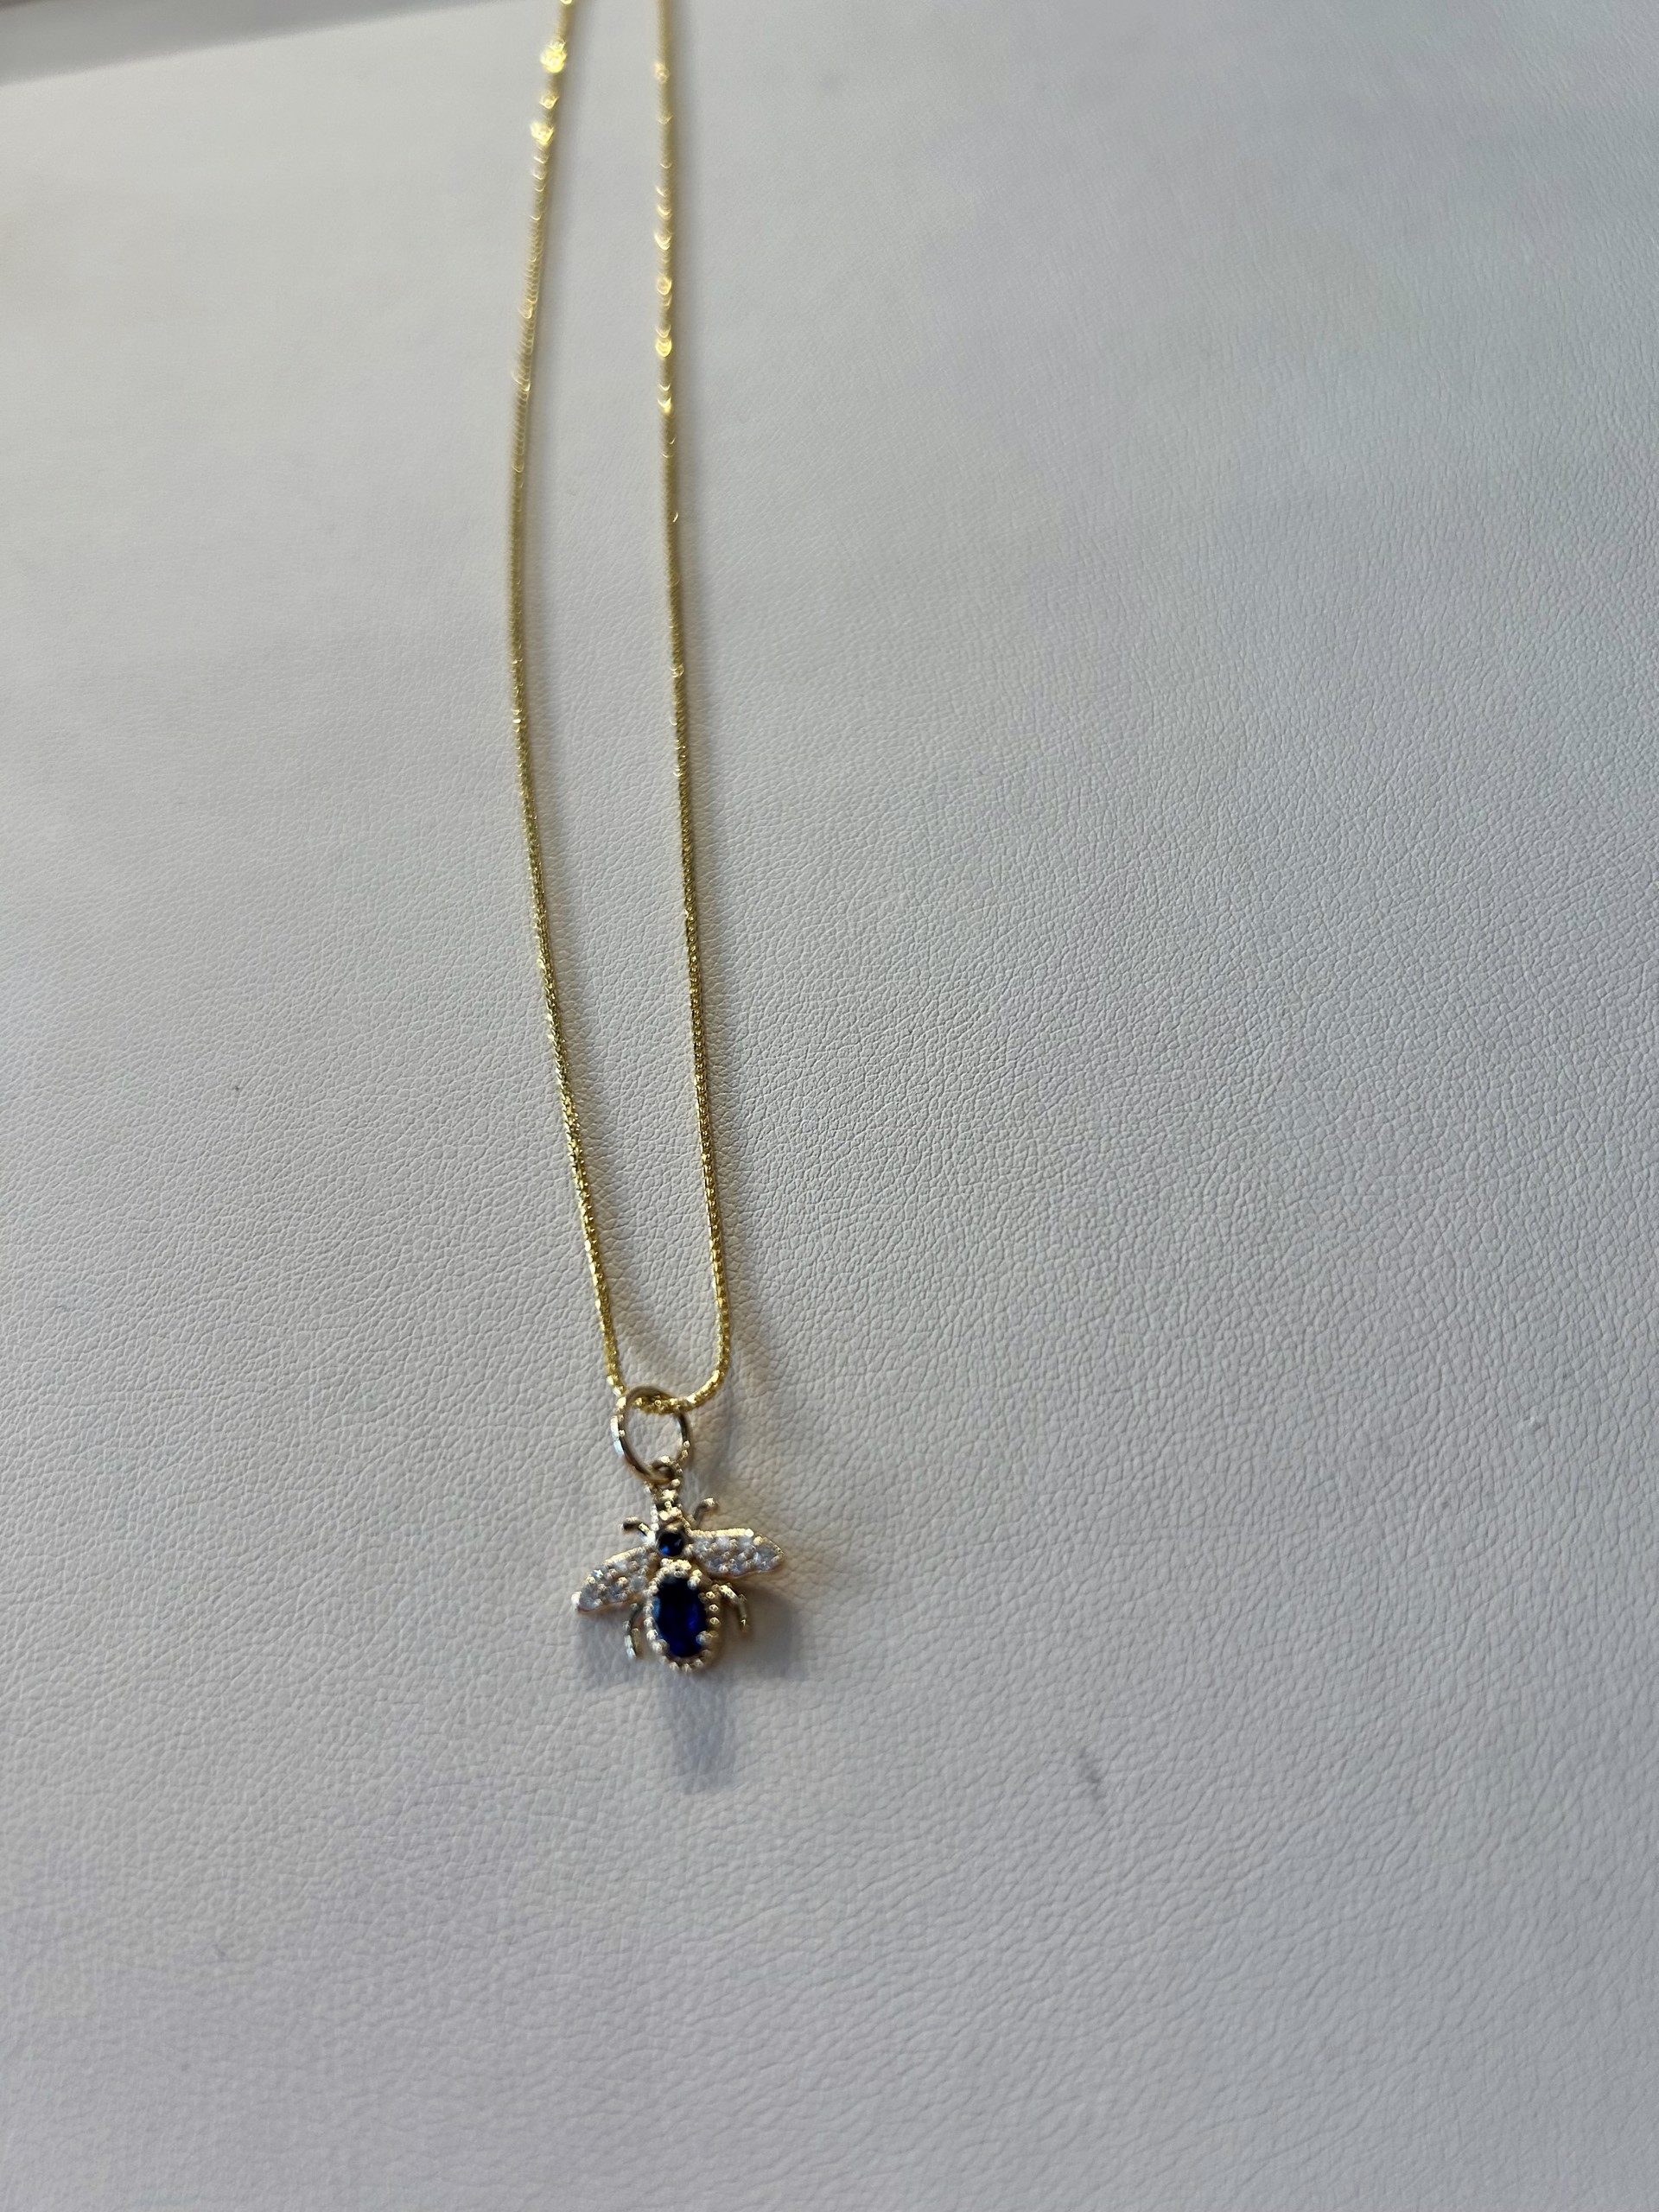 KB-N26 14k gold necklace with a gold diamond and blue sapphire Bee pendant by Karen Birchmier